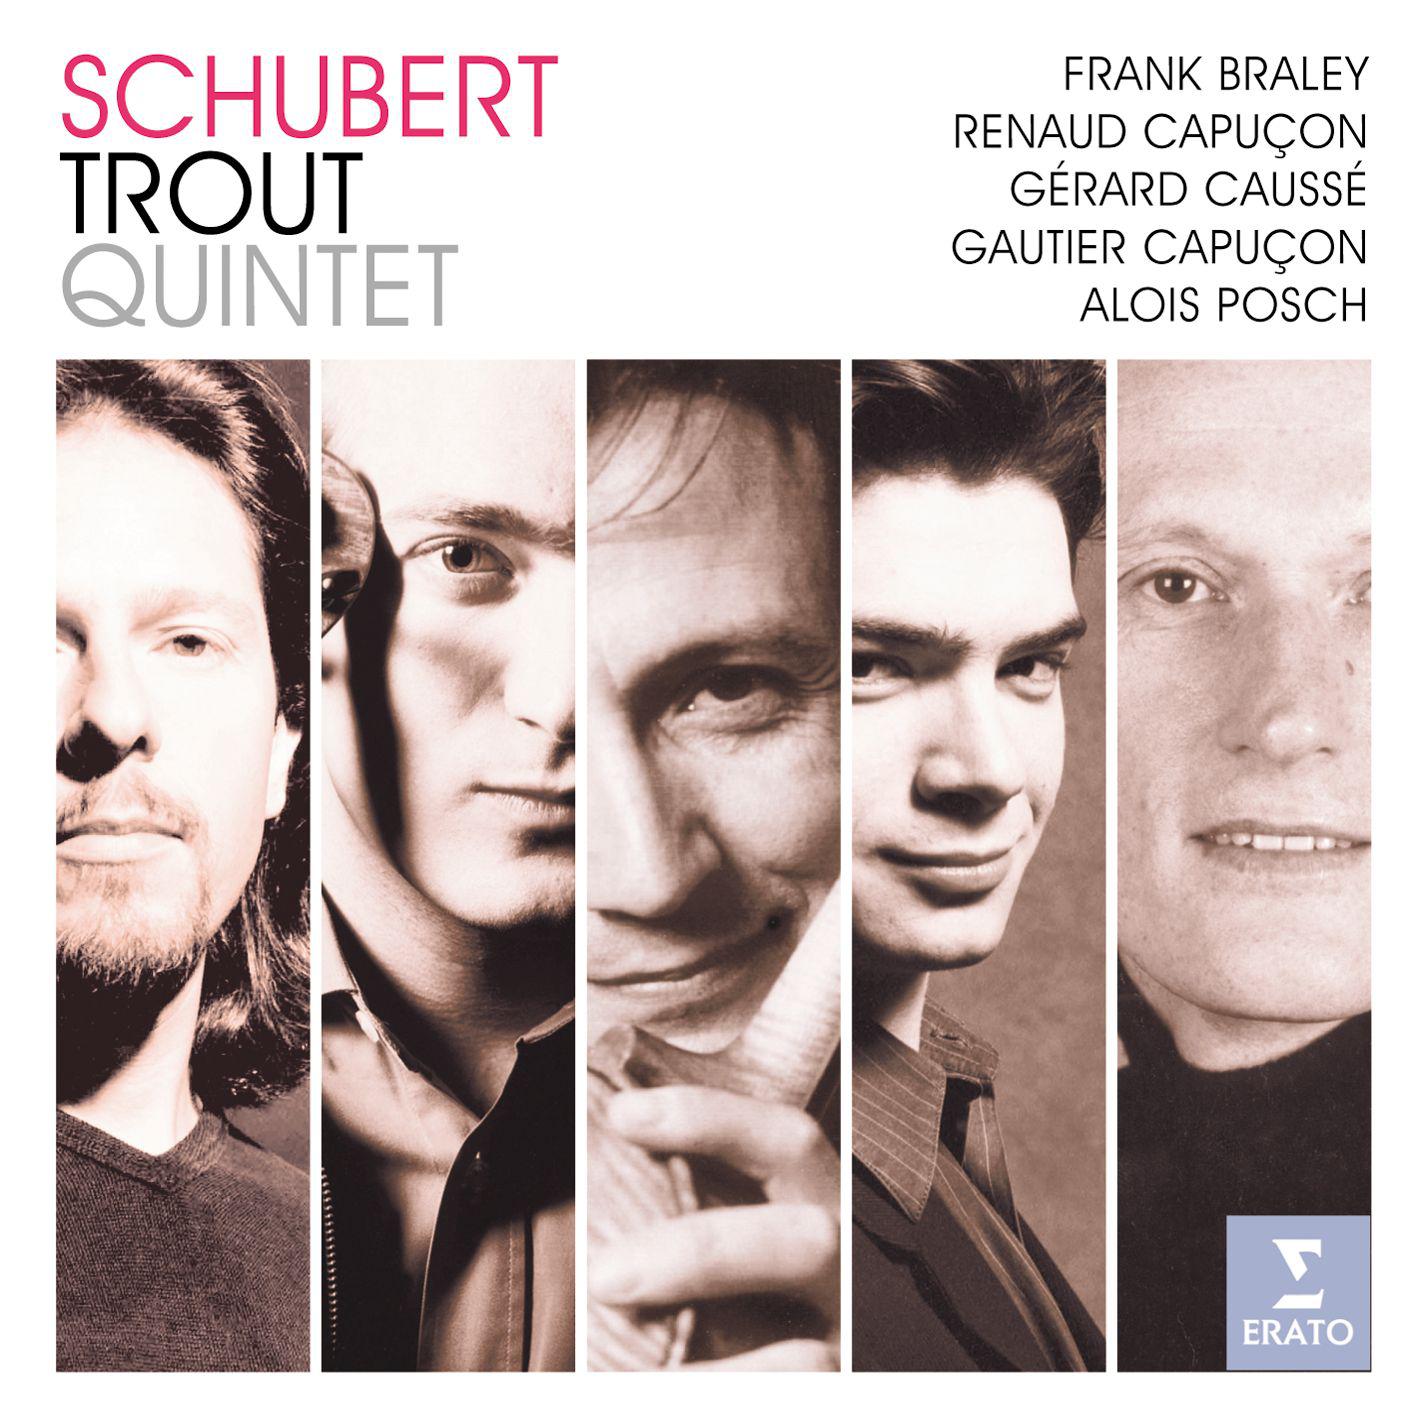 Piano Quintet in A 'The Trout' D667:I. Allegro vivace